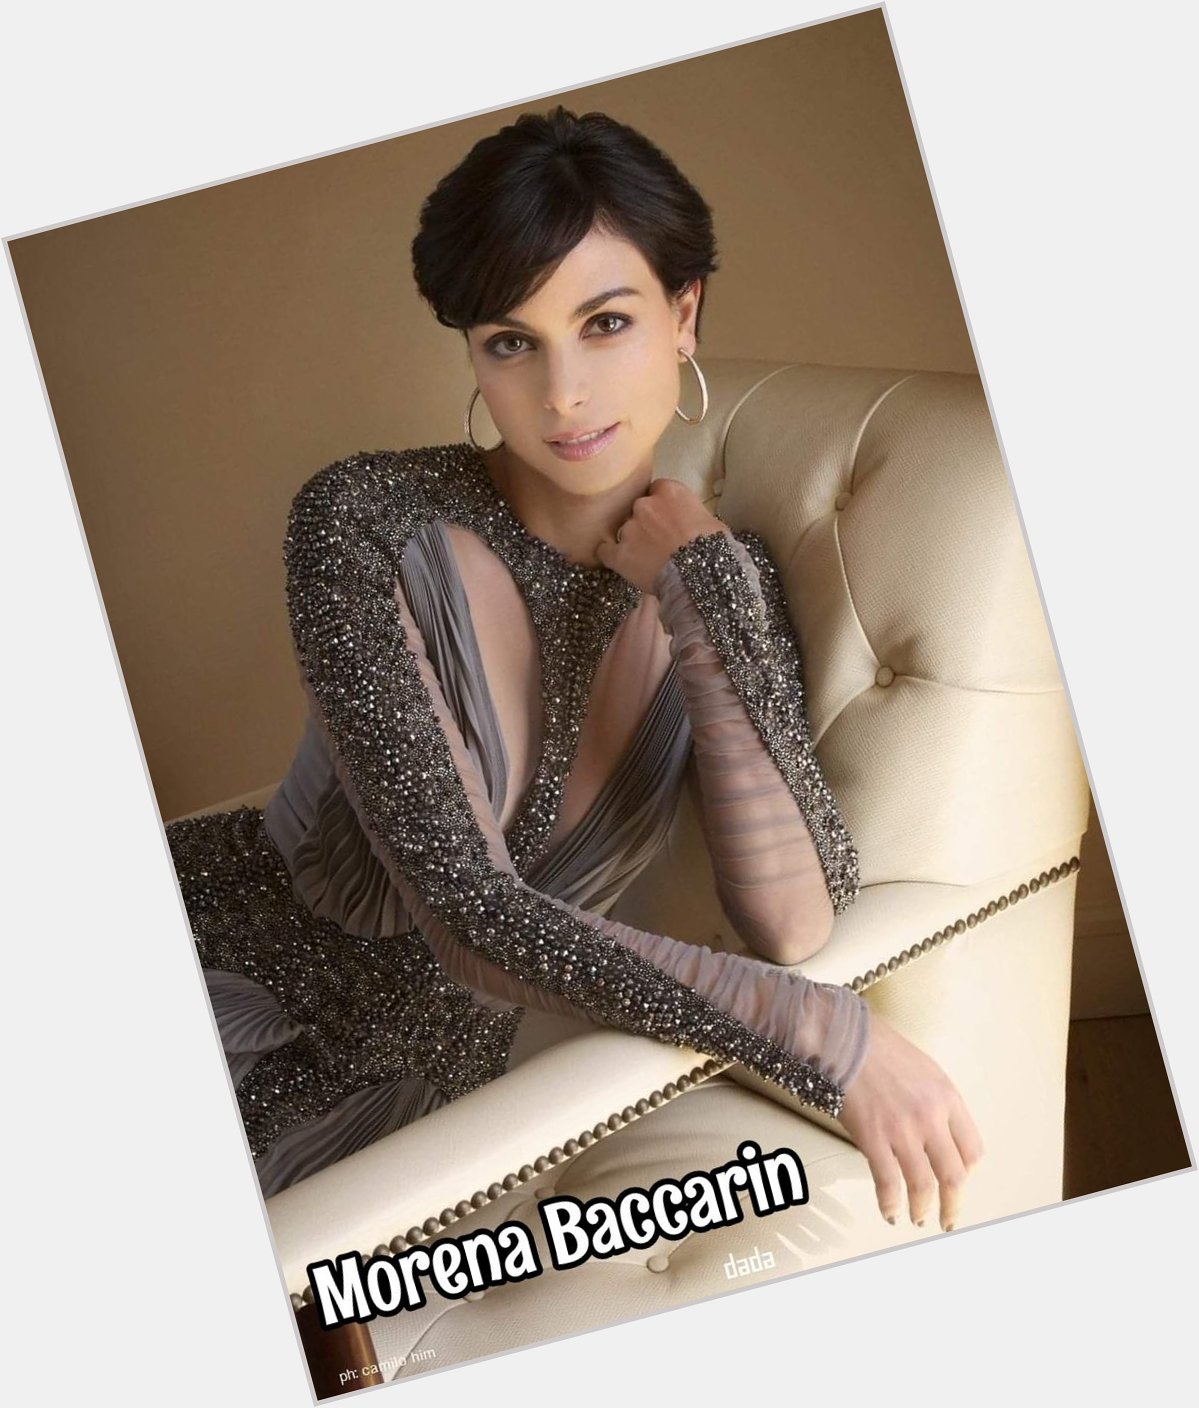 Happy Birthday to Morena Baccarin who turns 44 today! 